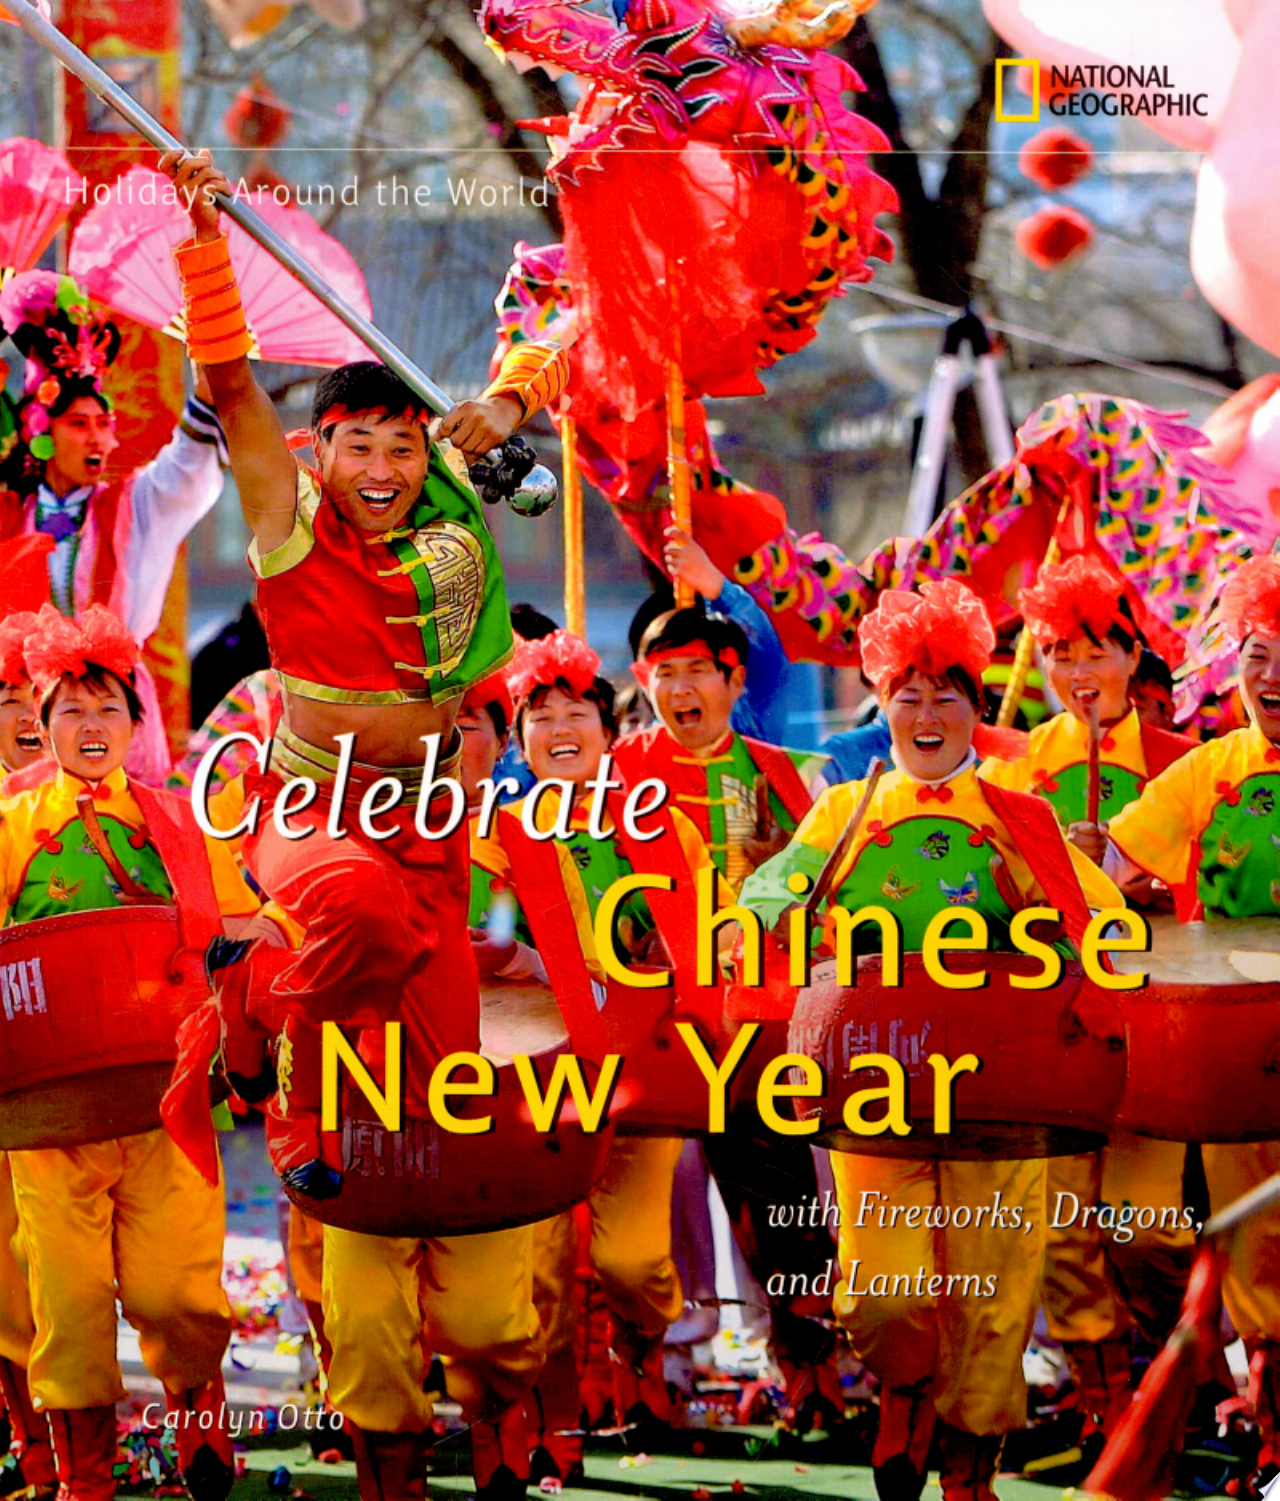 Image for "Celebrate Chinese New Year"